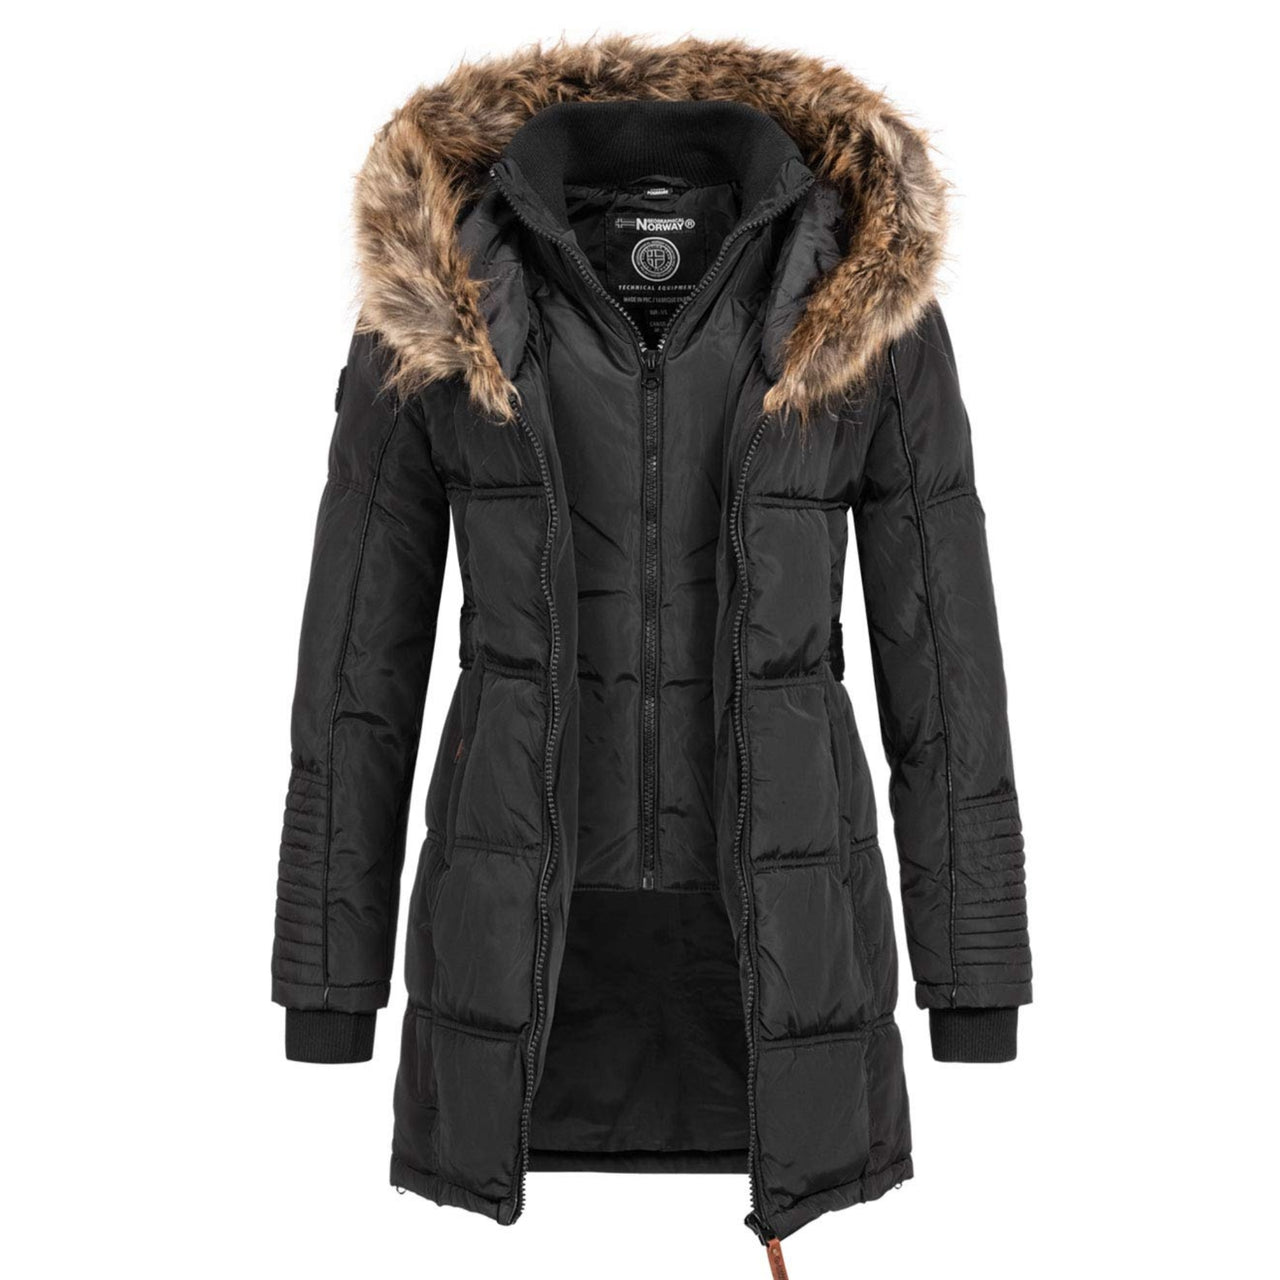 Geographical Norway AROMA LADY - Chaqueta Acolchada Para Mujer